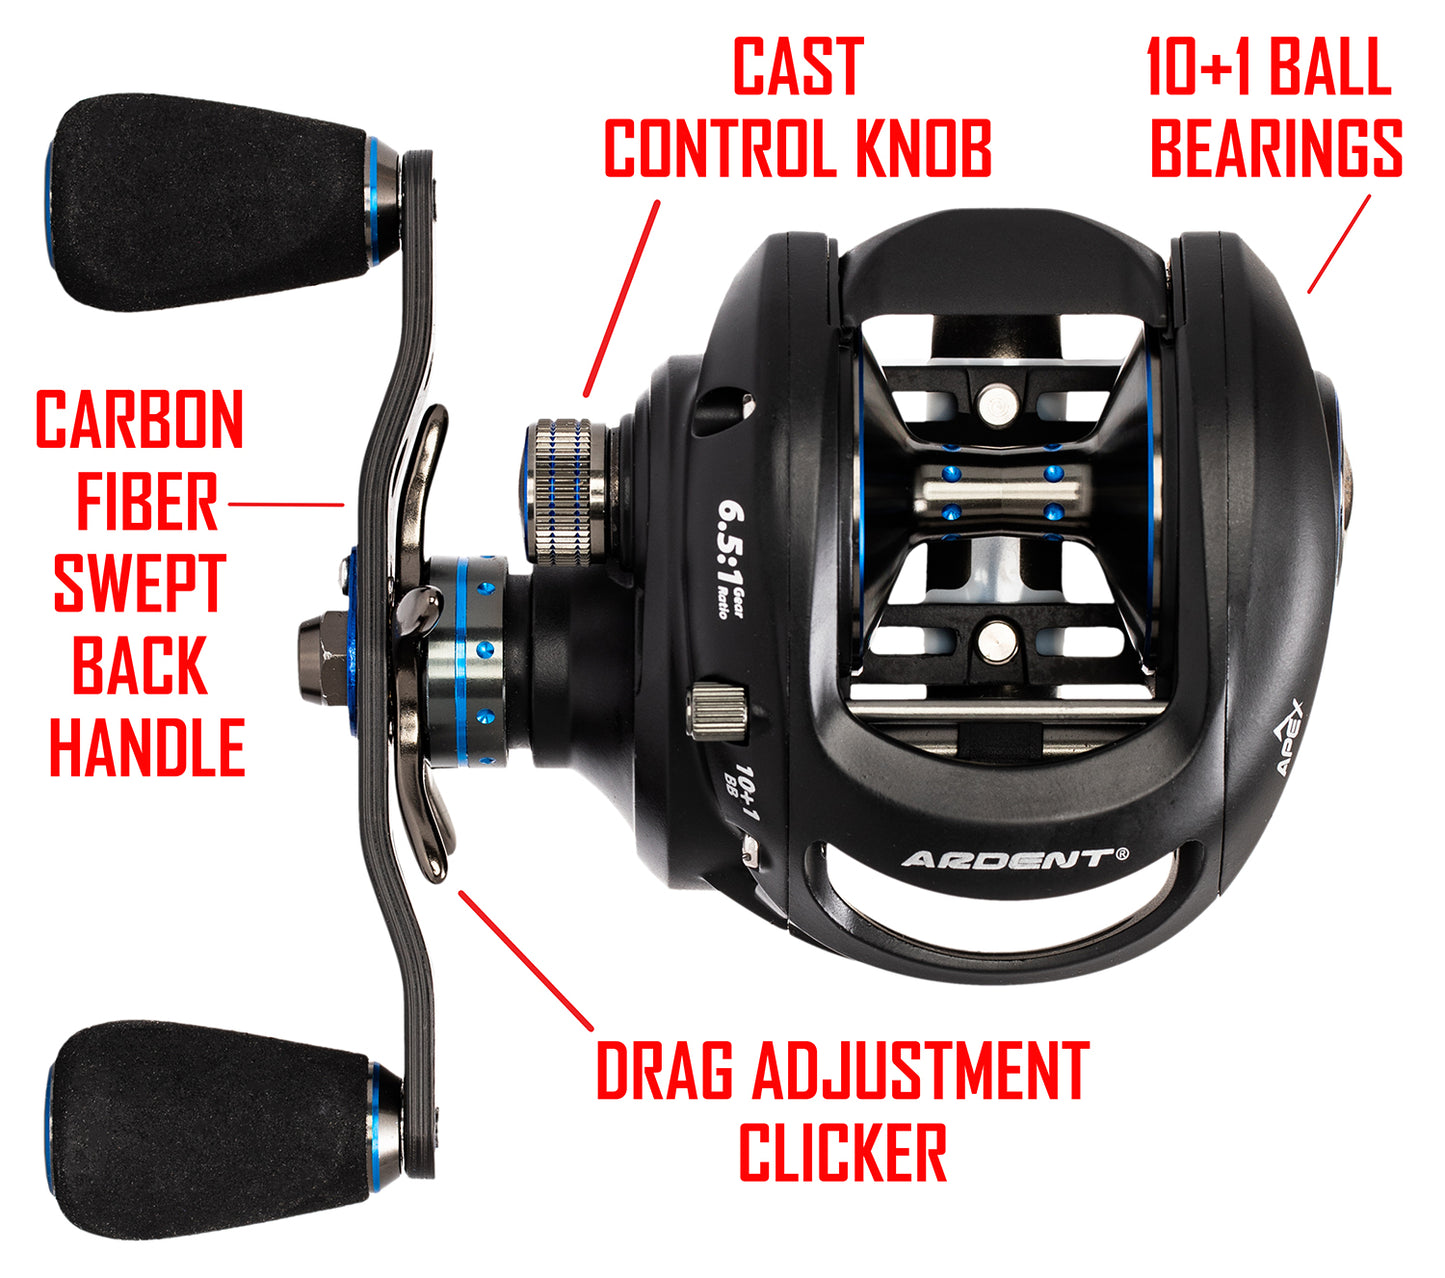 Black with blue APEX MAGNUM Baitcaster with red text. text: CARBON FIBER SWEPT BACK HANDLE CAST CONTROL KNOB DRAG ADJUSTMENT CLICKER 10+1 BALL BEARINGS